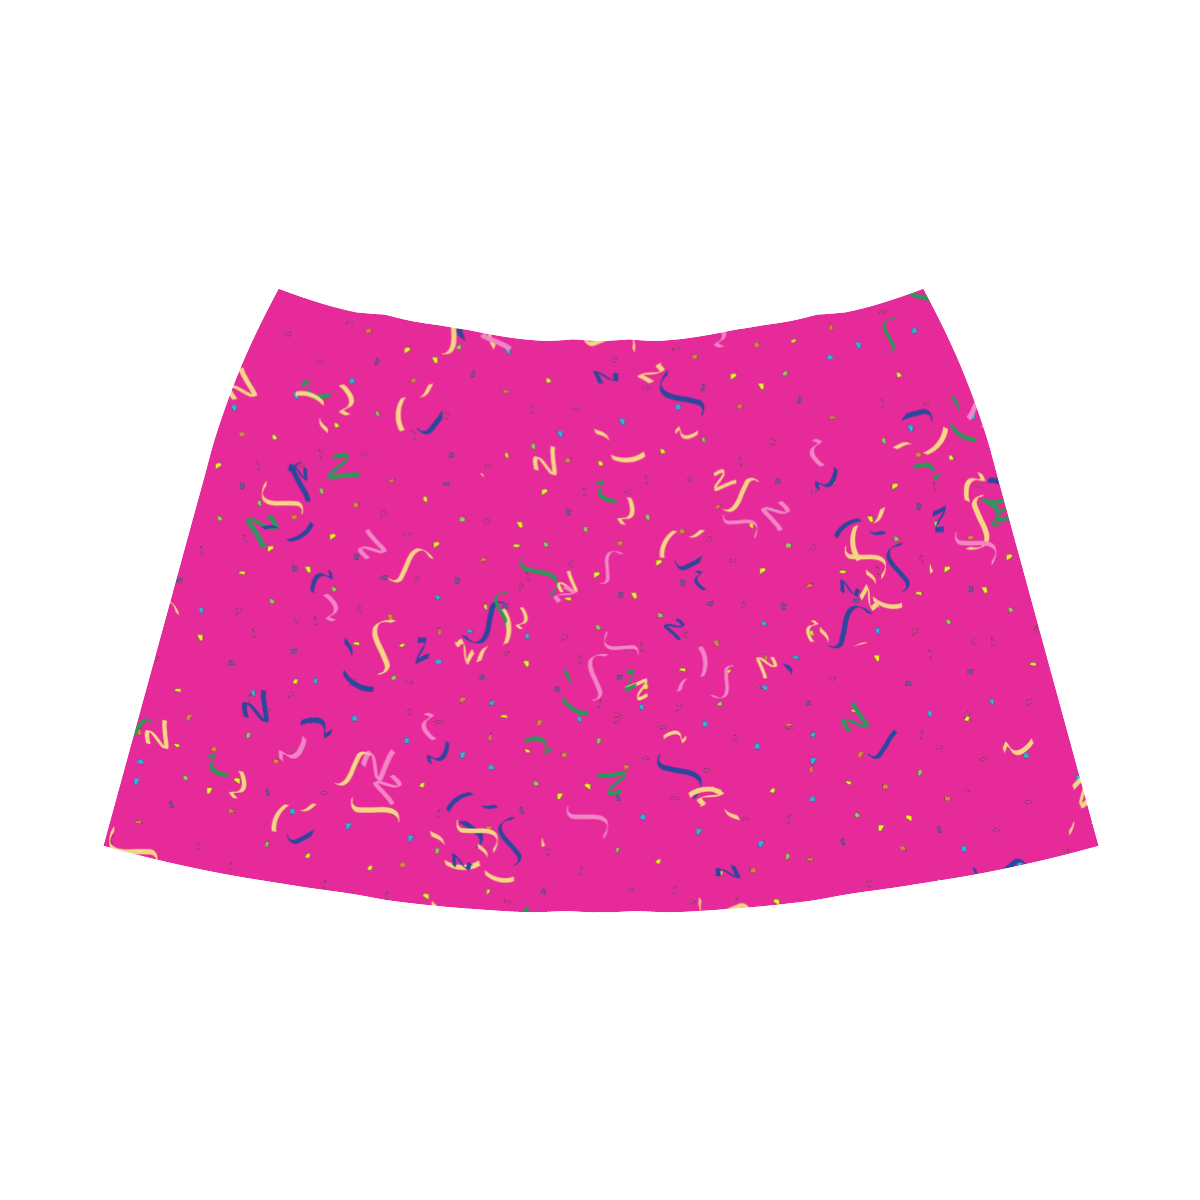 Confetti and  Party Streamers on Pink Mnemosyne Women's Crepe Skirt (Model D16)